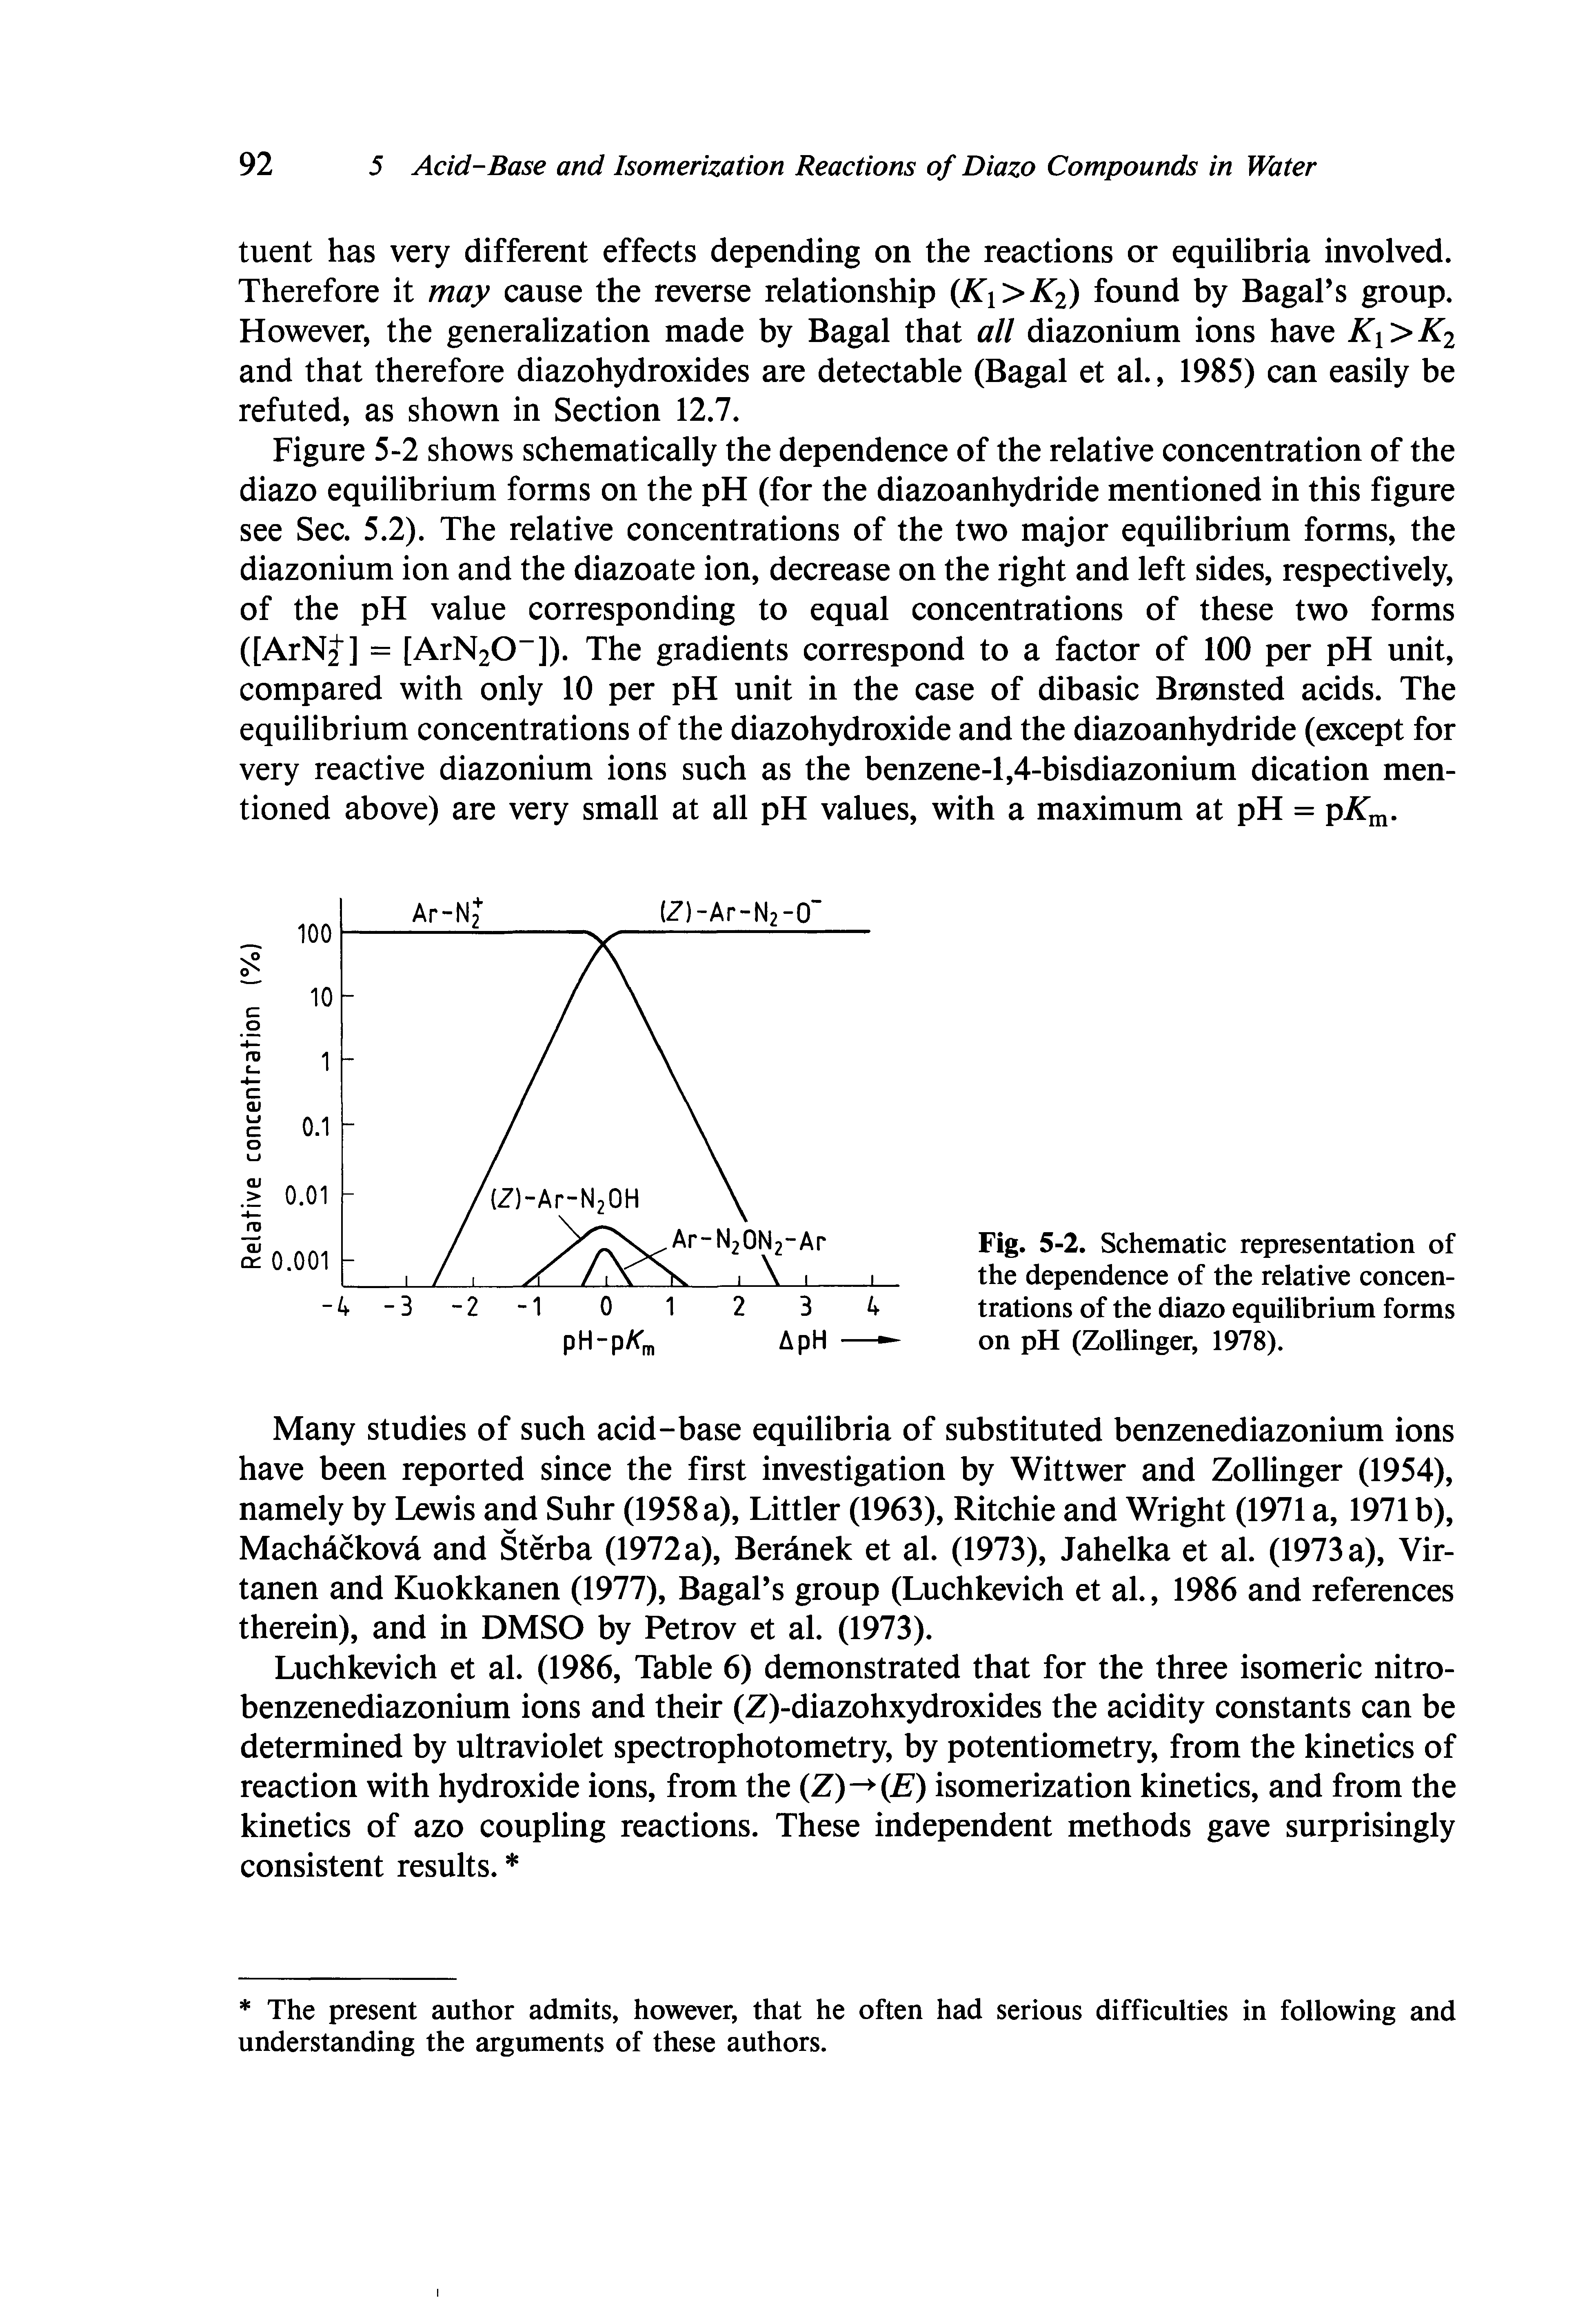 Fig. 5-2. Schematic representation of the dependence of the relative concentrations of the diazo equilibrium forms on pH (Zollinger, 1978).